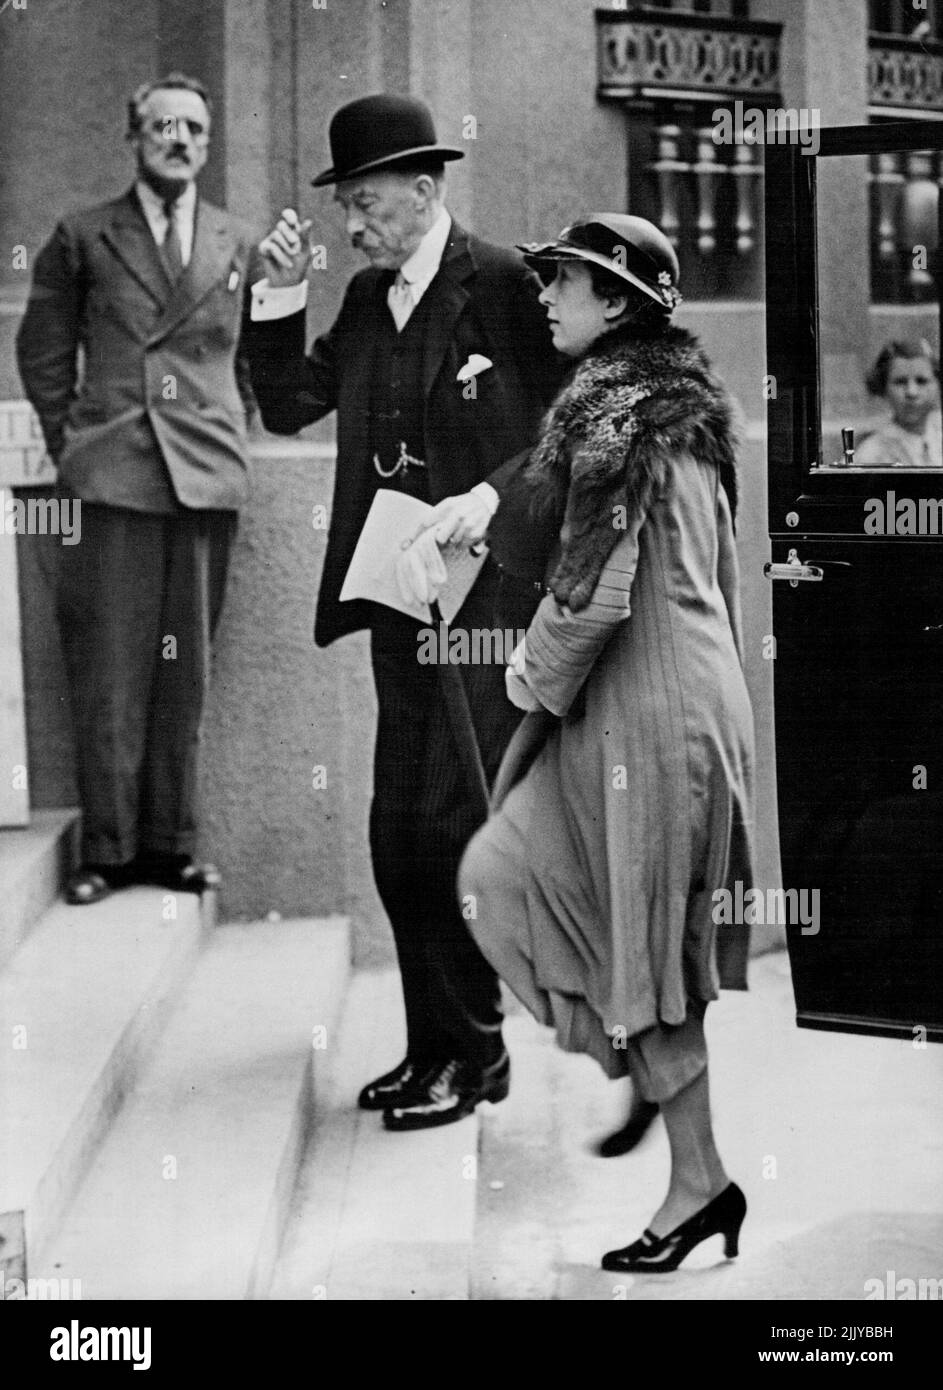 Princess Royal And Earl Of Harewood At Coronation Rehearsal -- The Princess Royal and The Earl of Harewood her husband, arriving at the Abbey. The Princess Royal and the Earl of Harewood were present in Westminster Abbey at a further Coronation rehearsal. May 06, 1937. Stock Photo